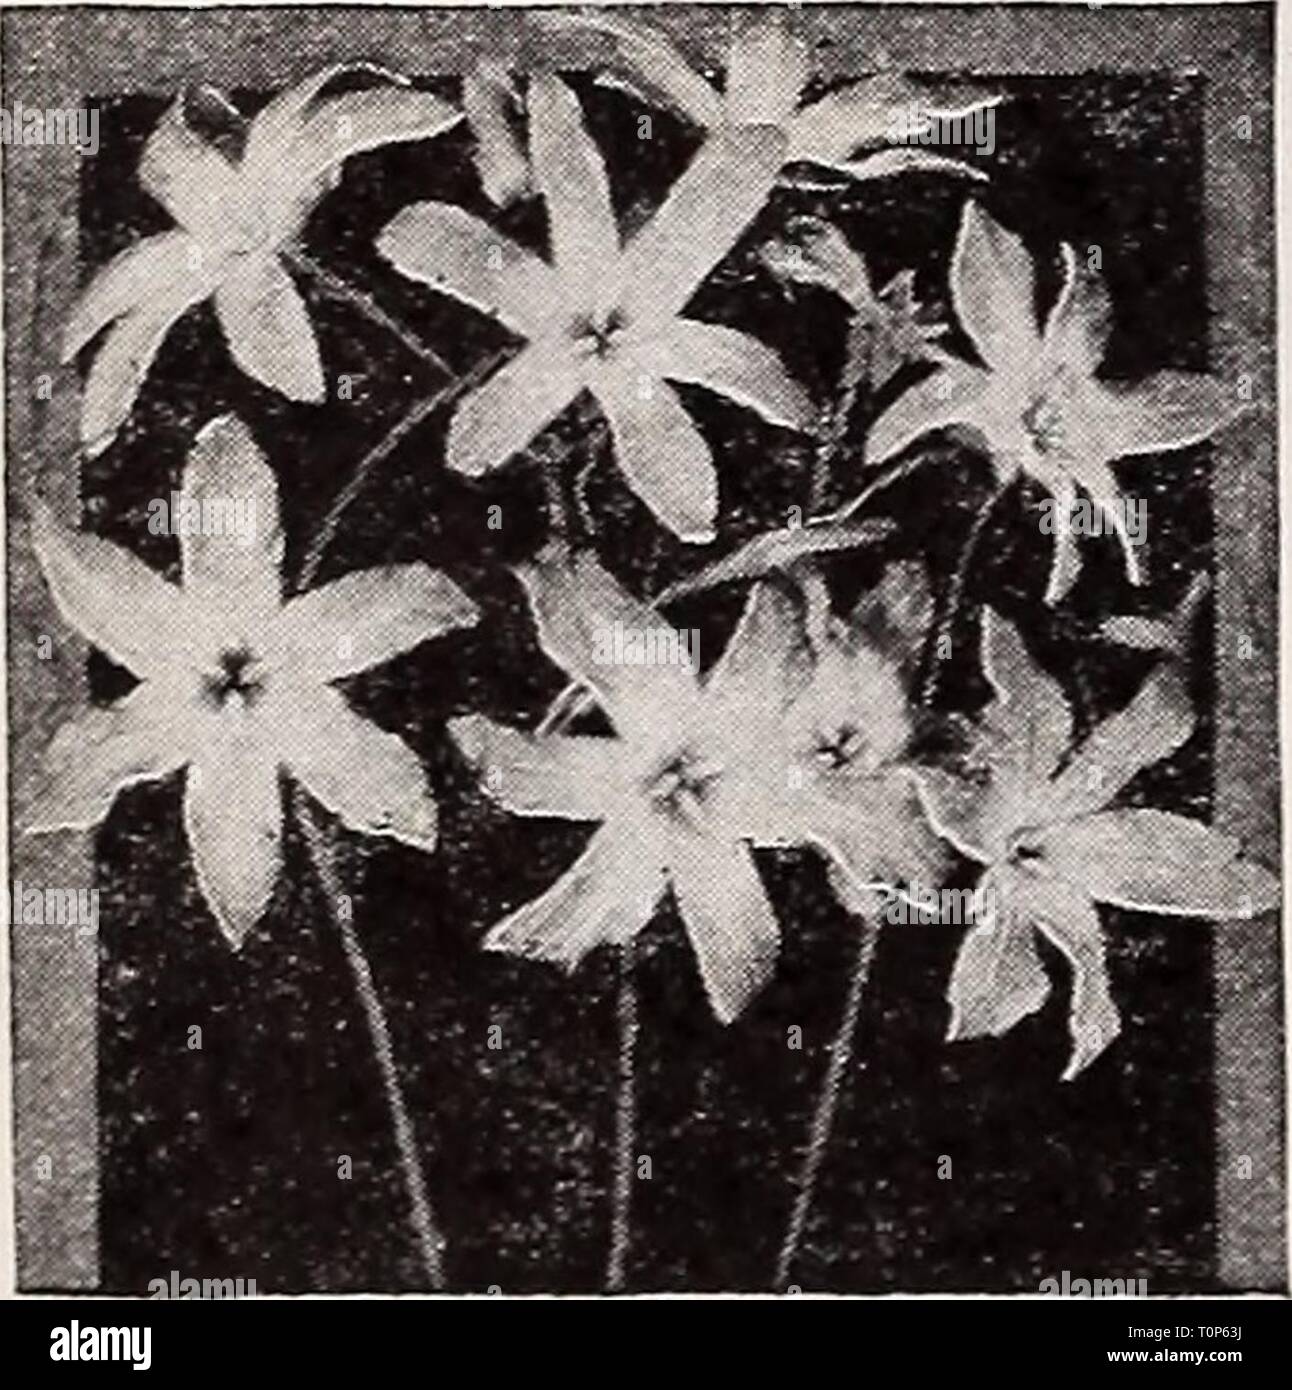 Dreer's autumn planting guide for Dreer's autumn planting guide for 1941  dreersautumnplan1941henr Year: 1941  Lycoris radiata 40-630 Lycons radiata September Spider Lily This often is erroneously 3 ^^^ 36c called Nerine or Guernsey Lily Order early and plant upon receipt to secure flowers this year. Place three bulbs in a five-inch pot. If planted too late they will develop foliage only. Keep foliage growing during the winter and spring. The leaves develop after the showy salmon-rose flowers which appear from September to November. The long pro- truding stamens add considerable interest. Mamm Stock Photo